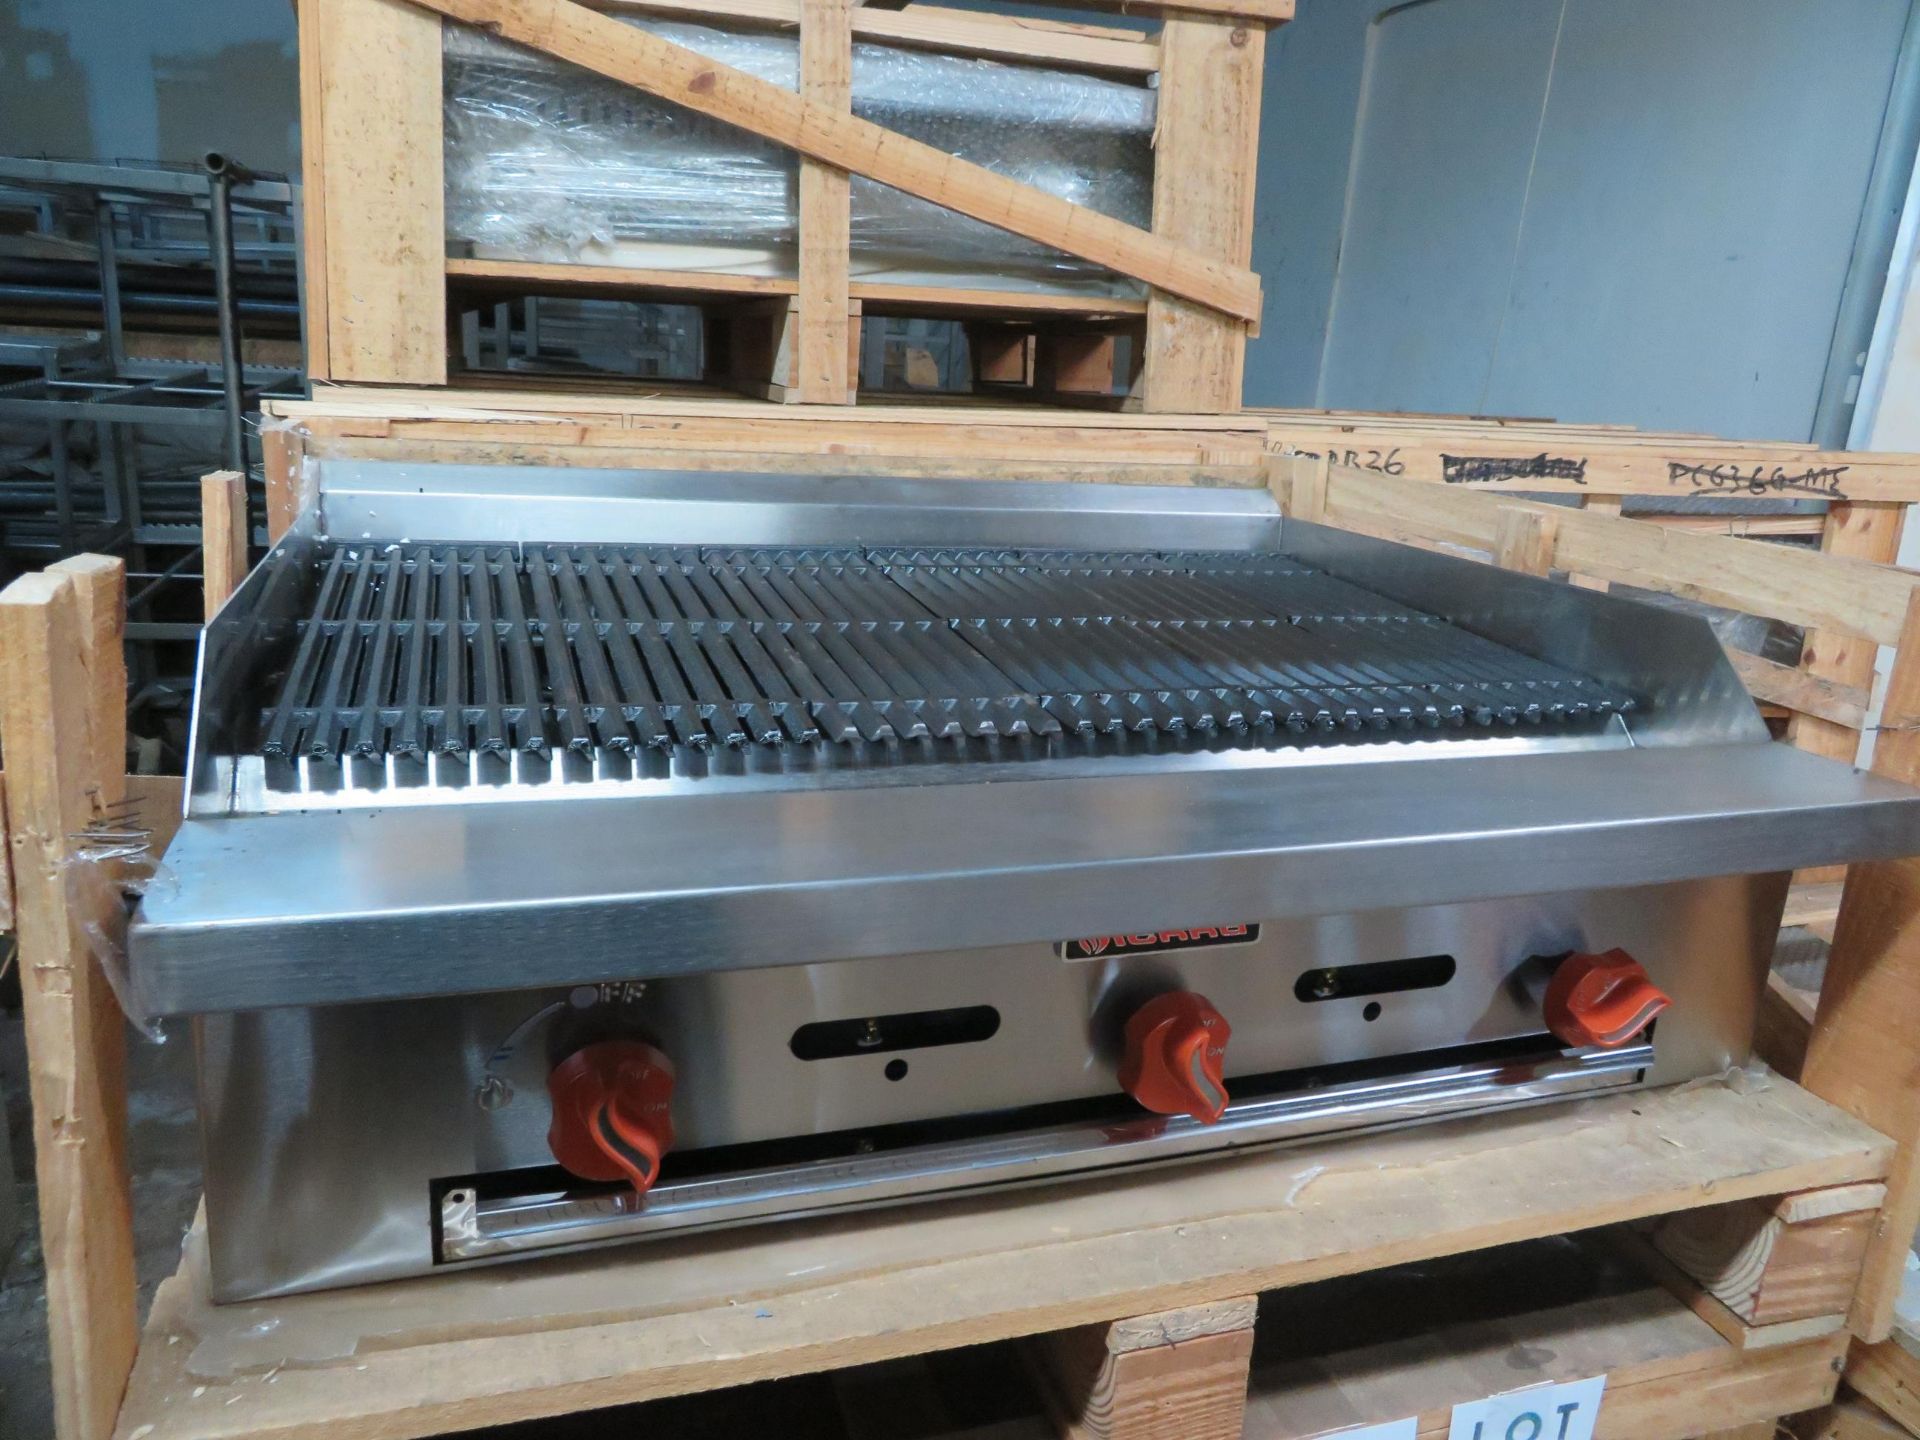 Brand New SIERRA natural gas radiant 36" broiler, Mod #SRRB-36 approx. 36"w x 30"d x 12"h - Image 2 of 2